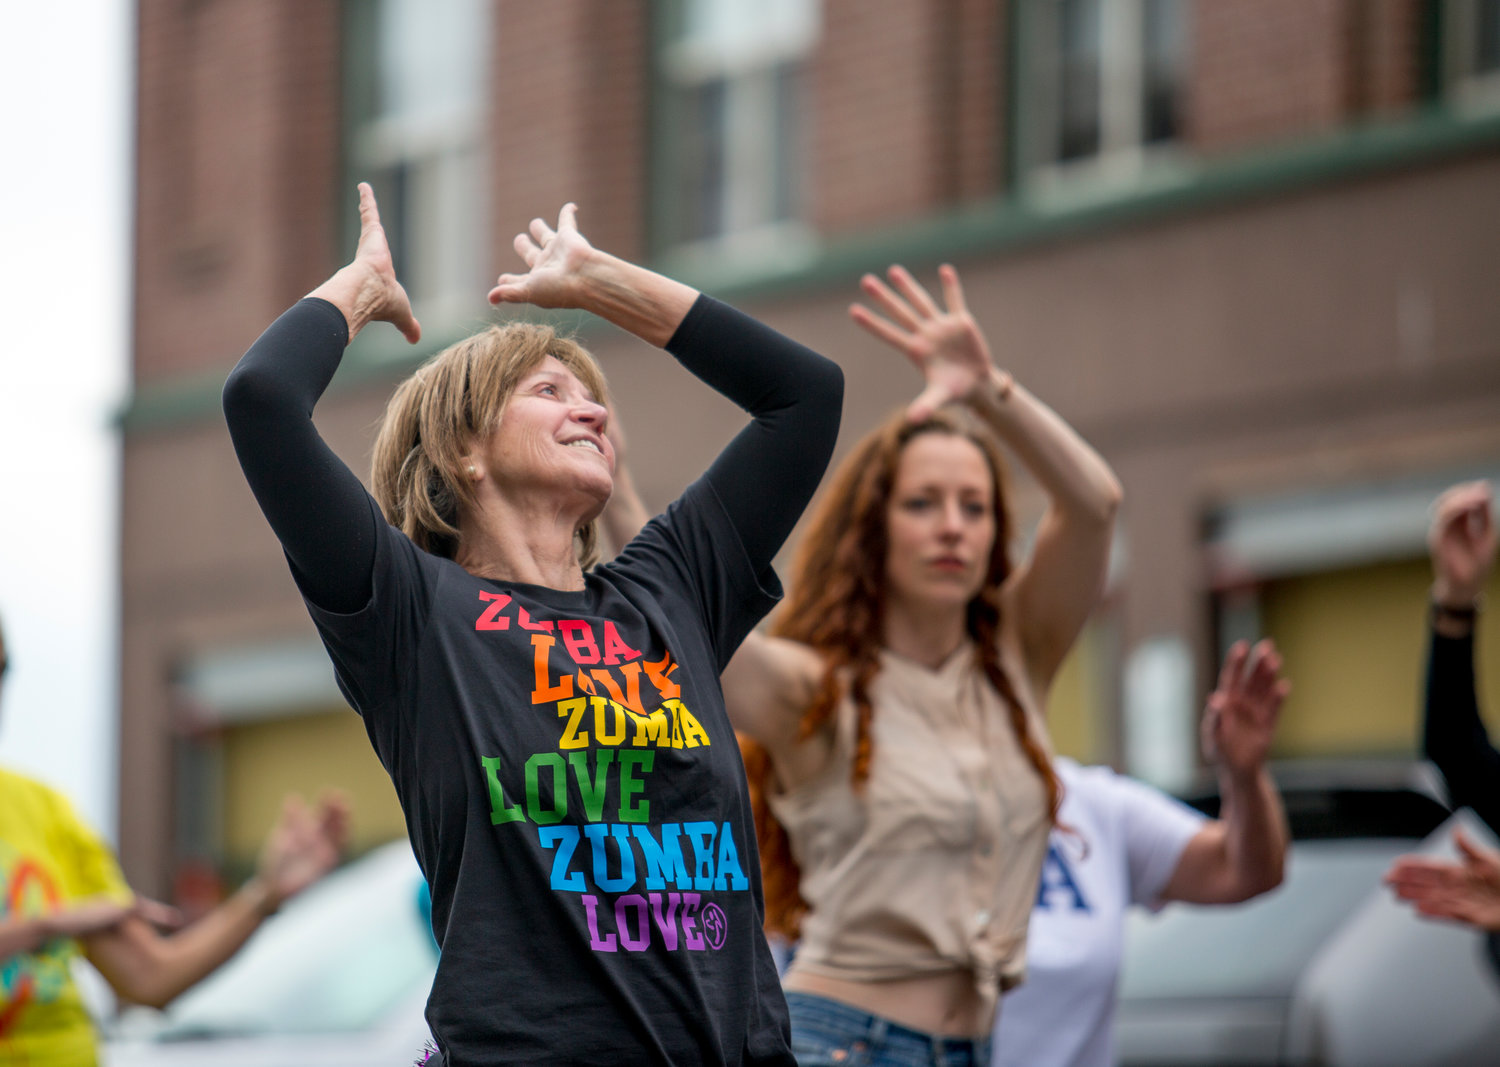 Susan Rucker dances along with students, friends, and fellow instructors during the June 26 flash mob.